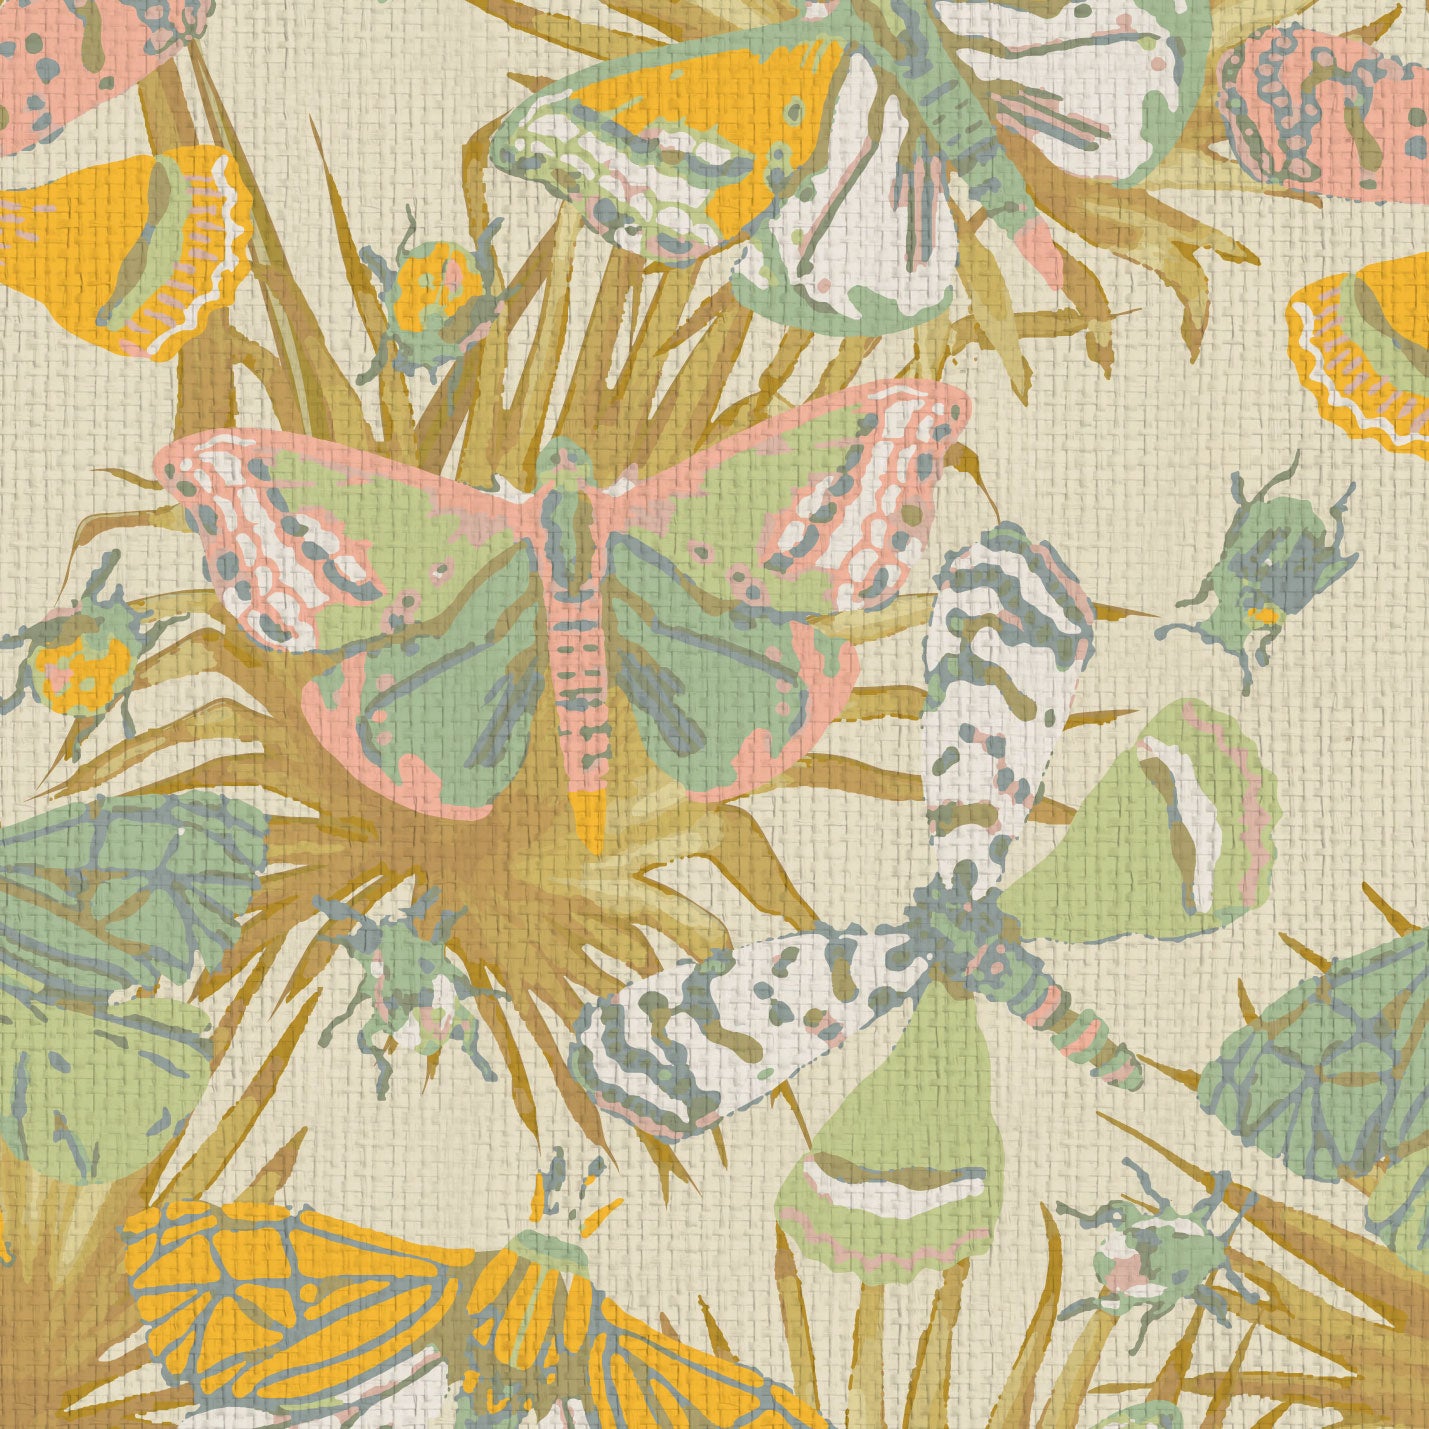 paperweave paper weave wallpaper Natural Textured Eco-Friendly Non-toxic High-quality Sustainable Interior Design Bold Custom Tailor-made Retro chic Bold tropical butterfly bug palm leaves animals botanical garden nature kids playroom bedroom nursery beige neutral cream